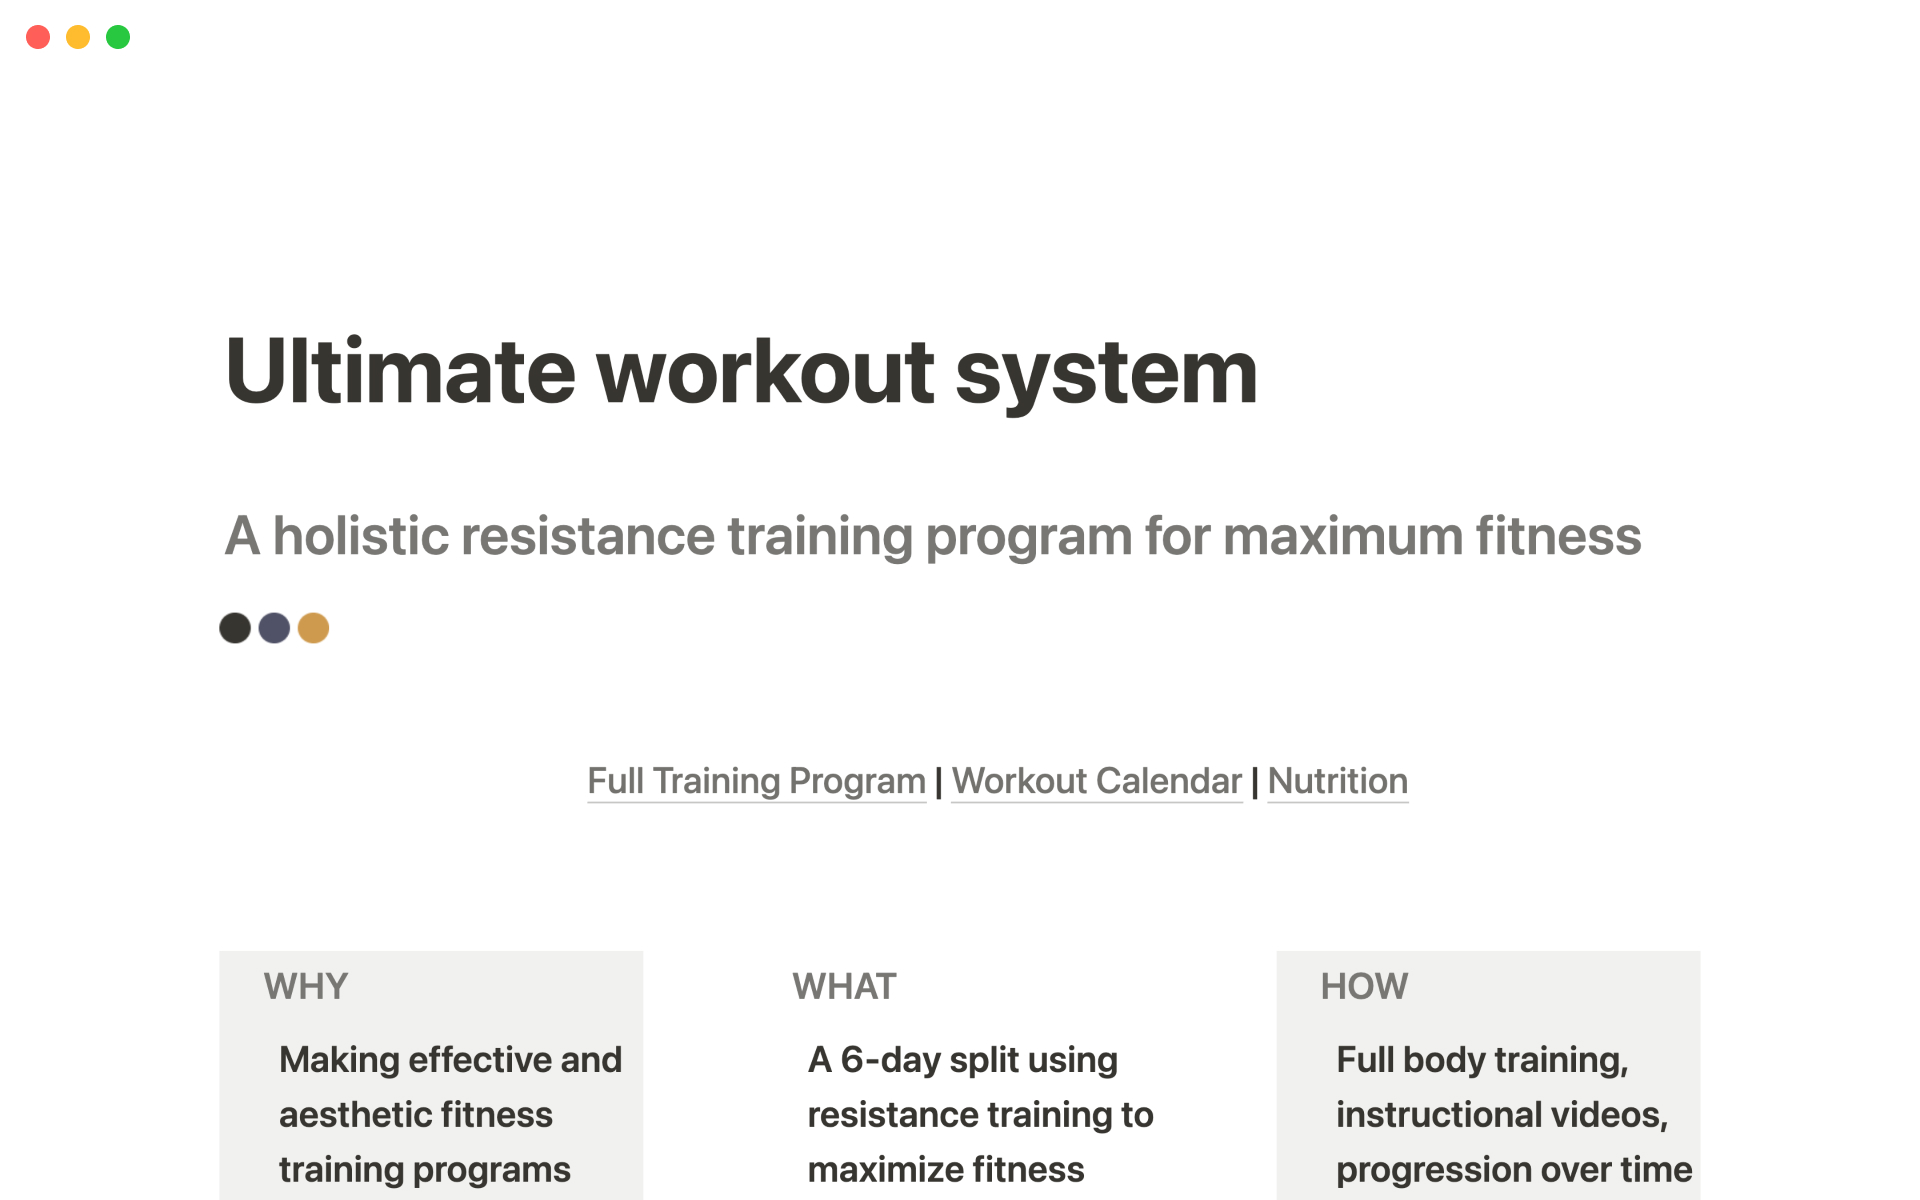 The desktop image for the Ultimate workout system template